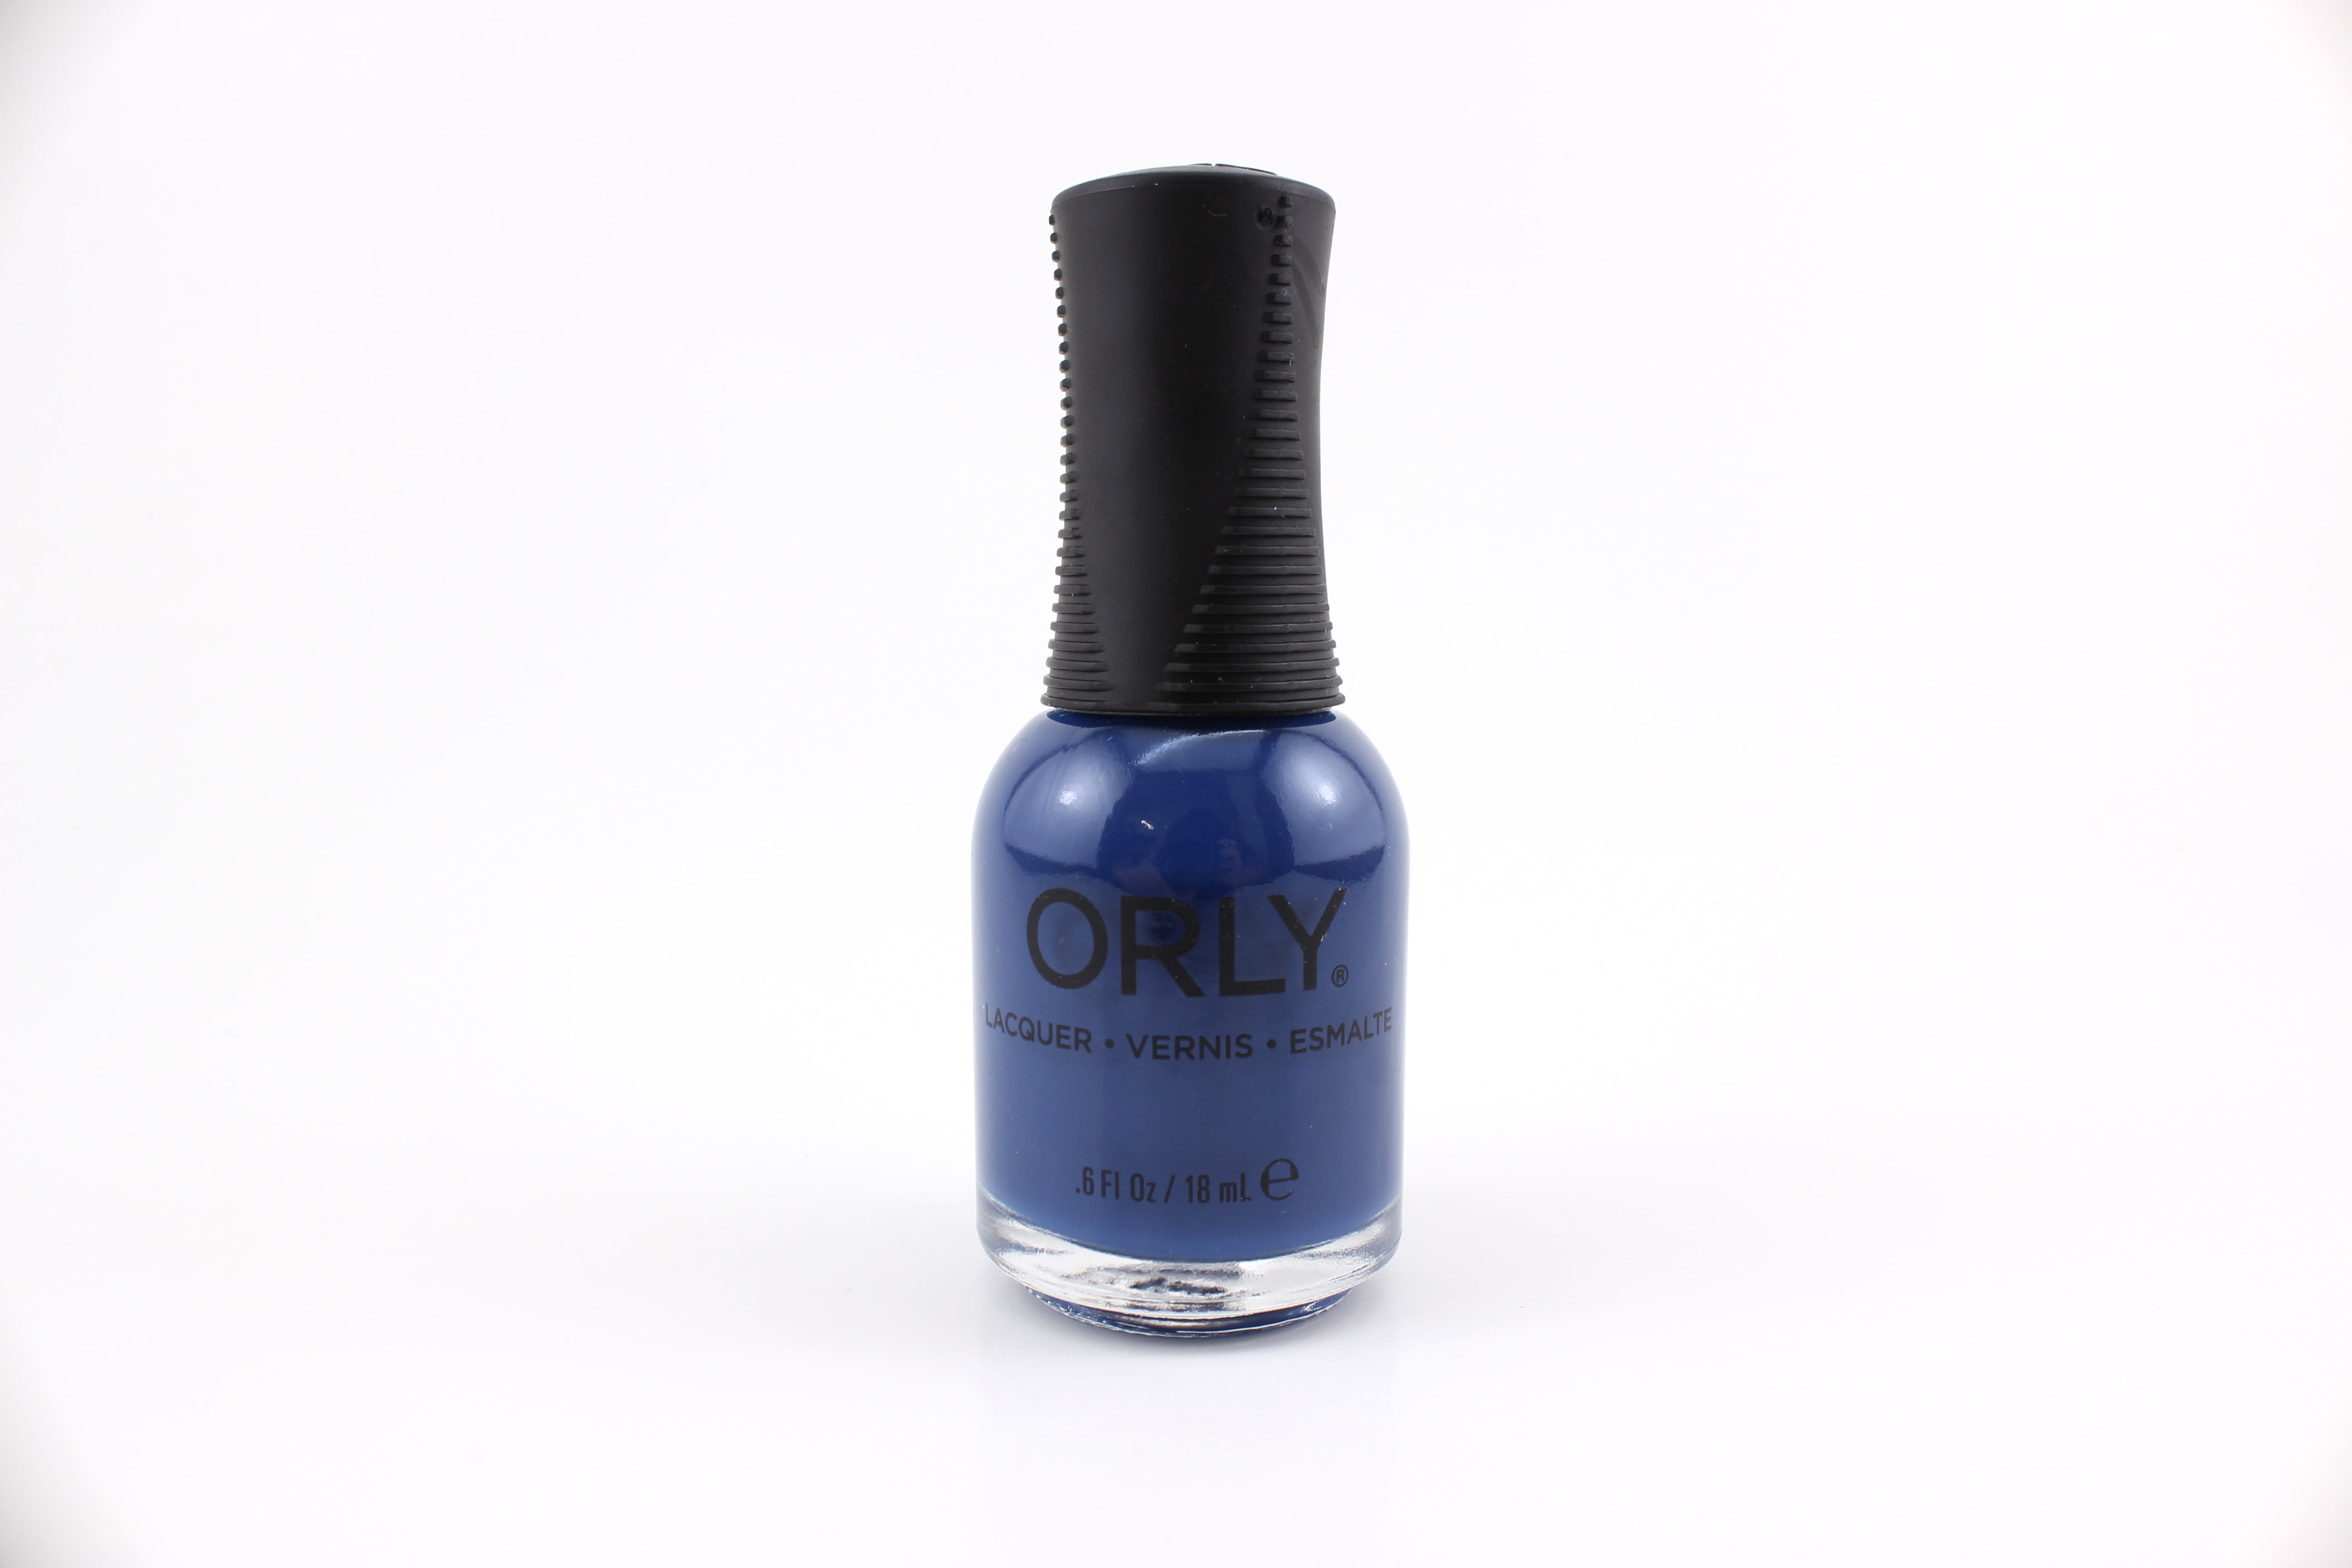 Orly Nail Lacquer in "Garnet" - wide 4